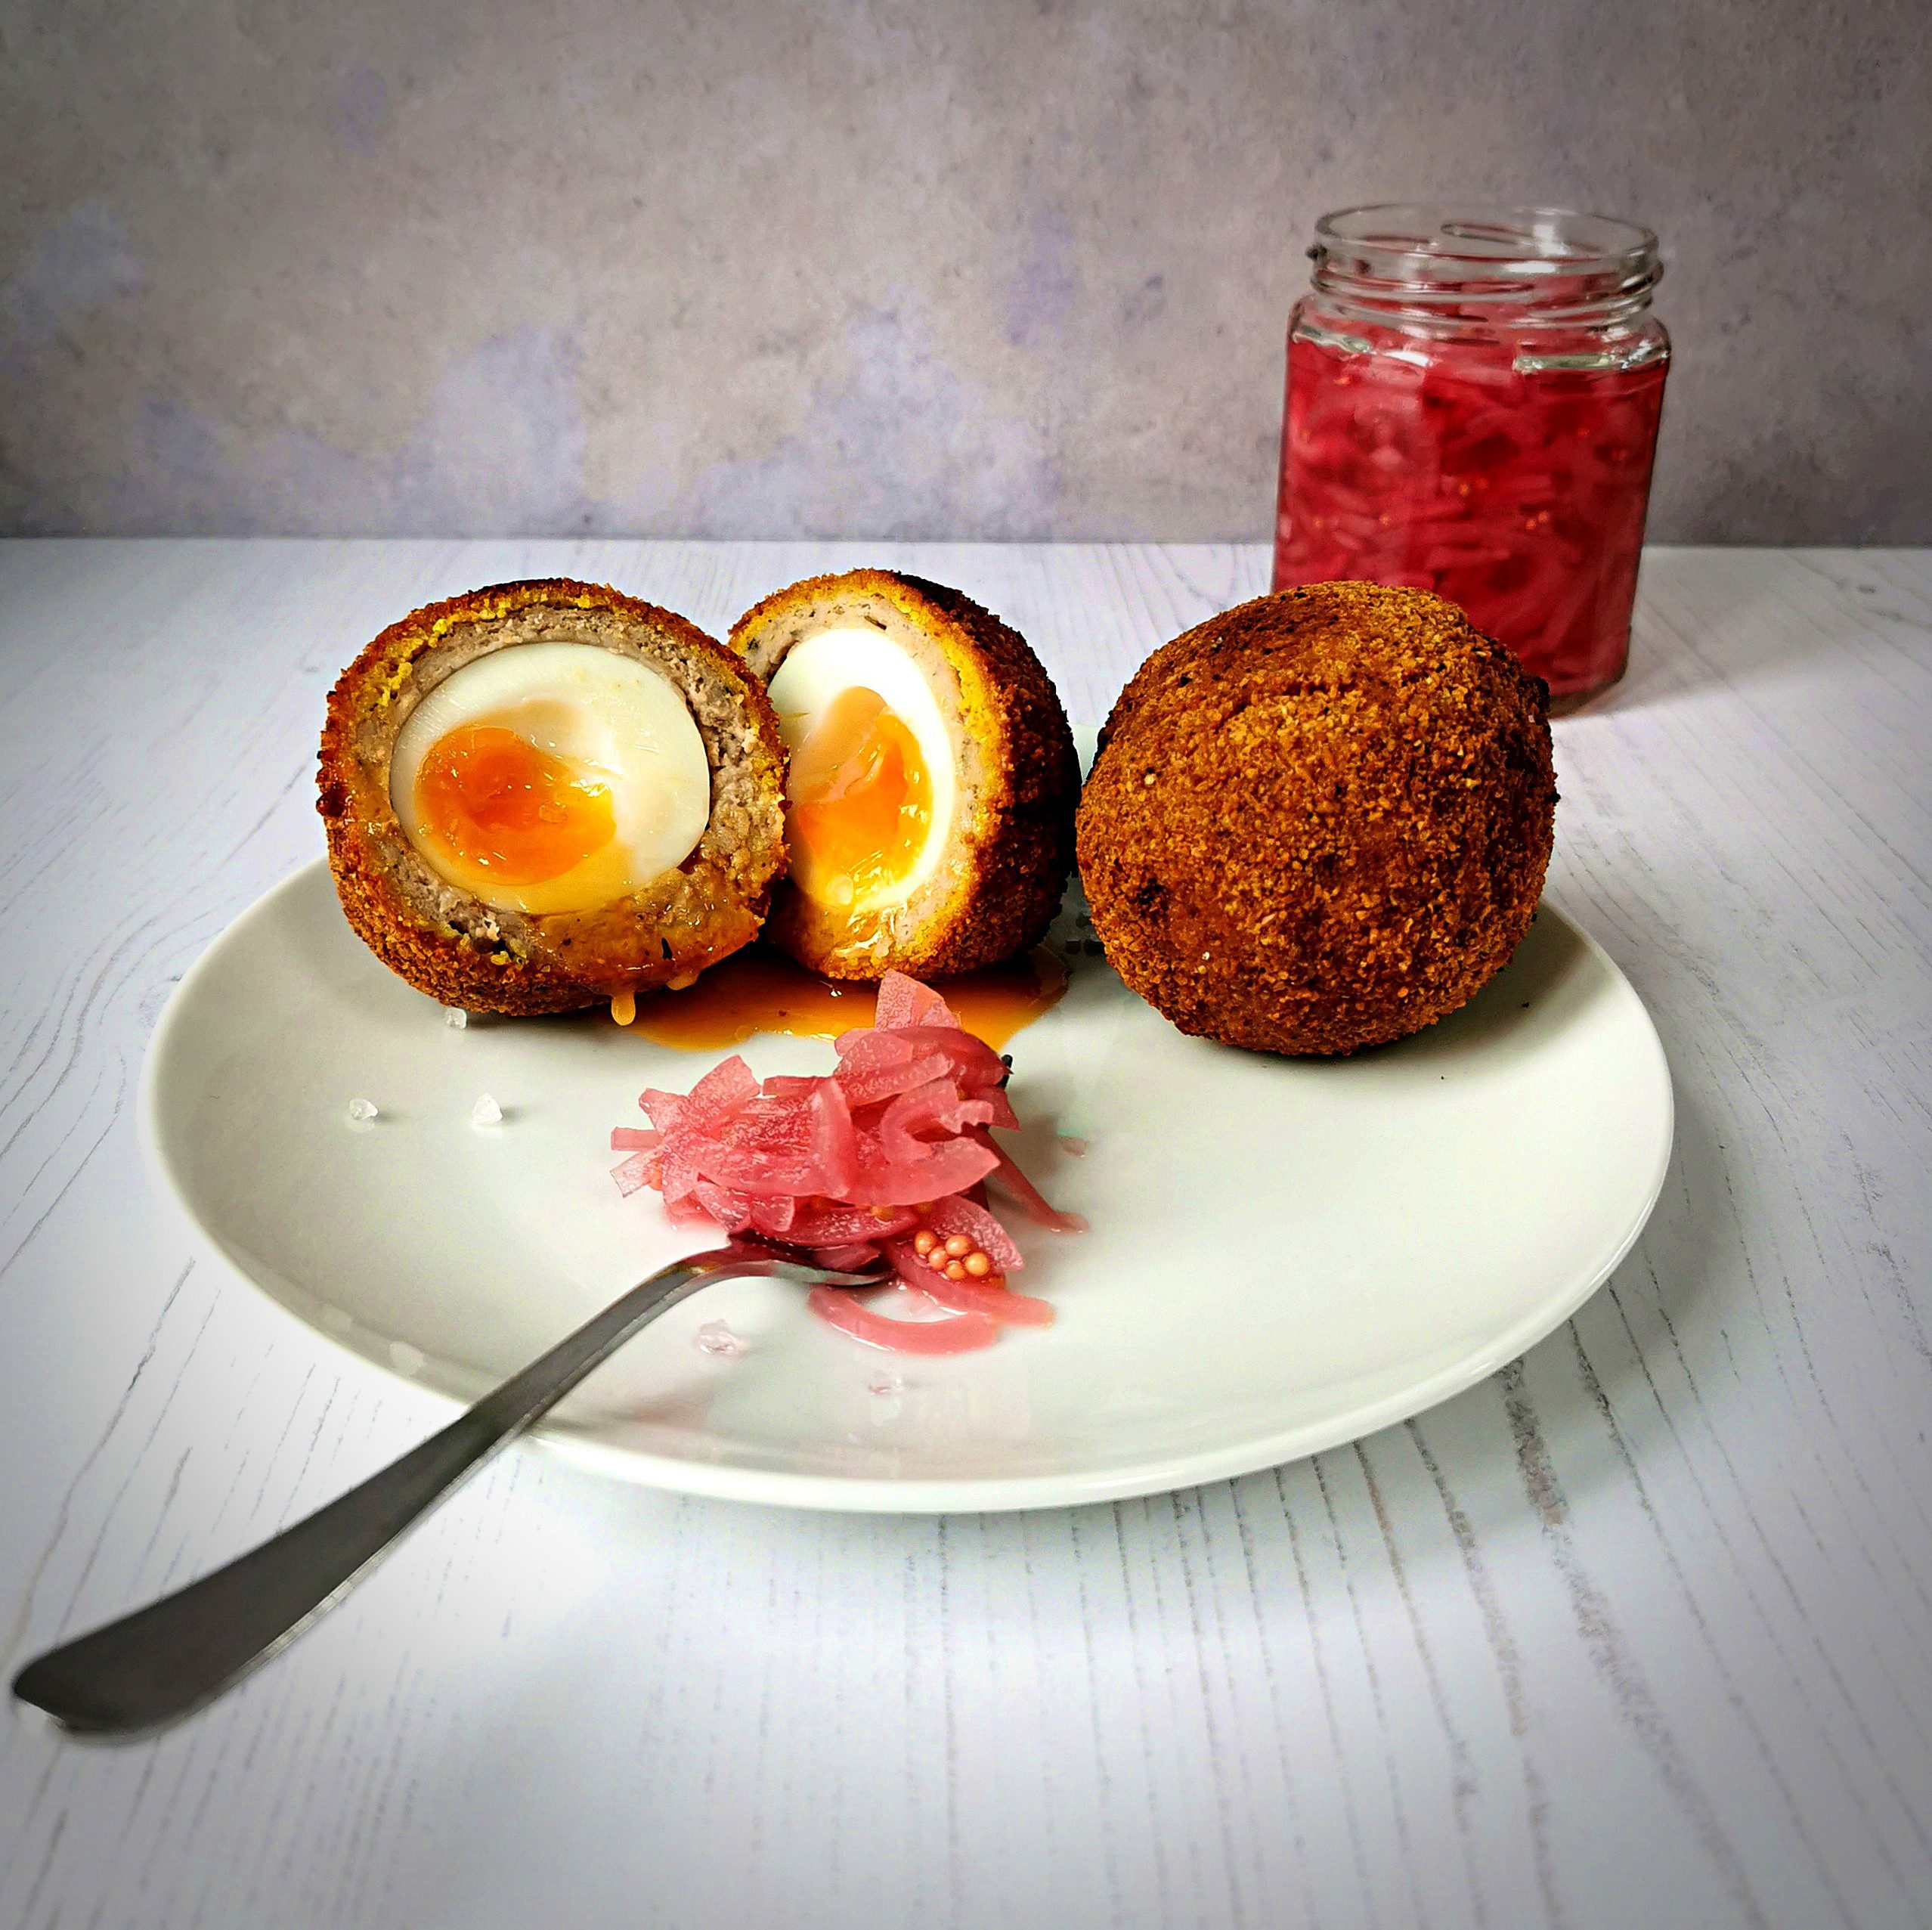 A scotch egg cut in half with a golden runny yolk. Plus a whole scotch egg on a plate with a forkful of pink pickled onions and a jar behind.